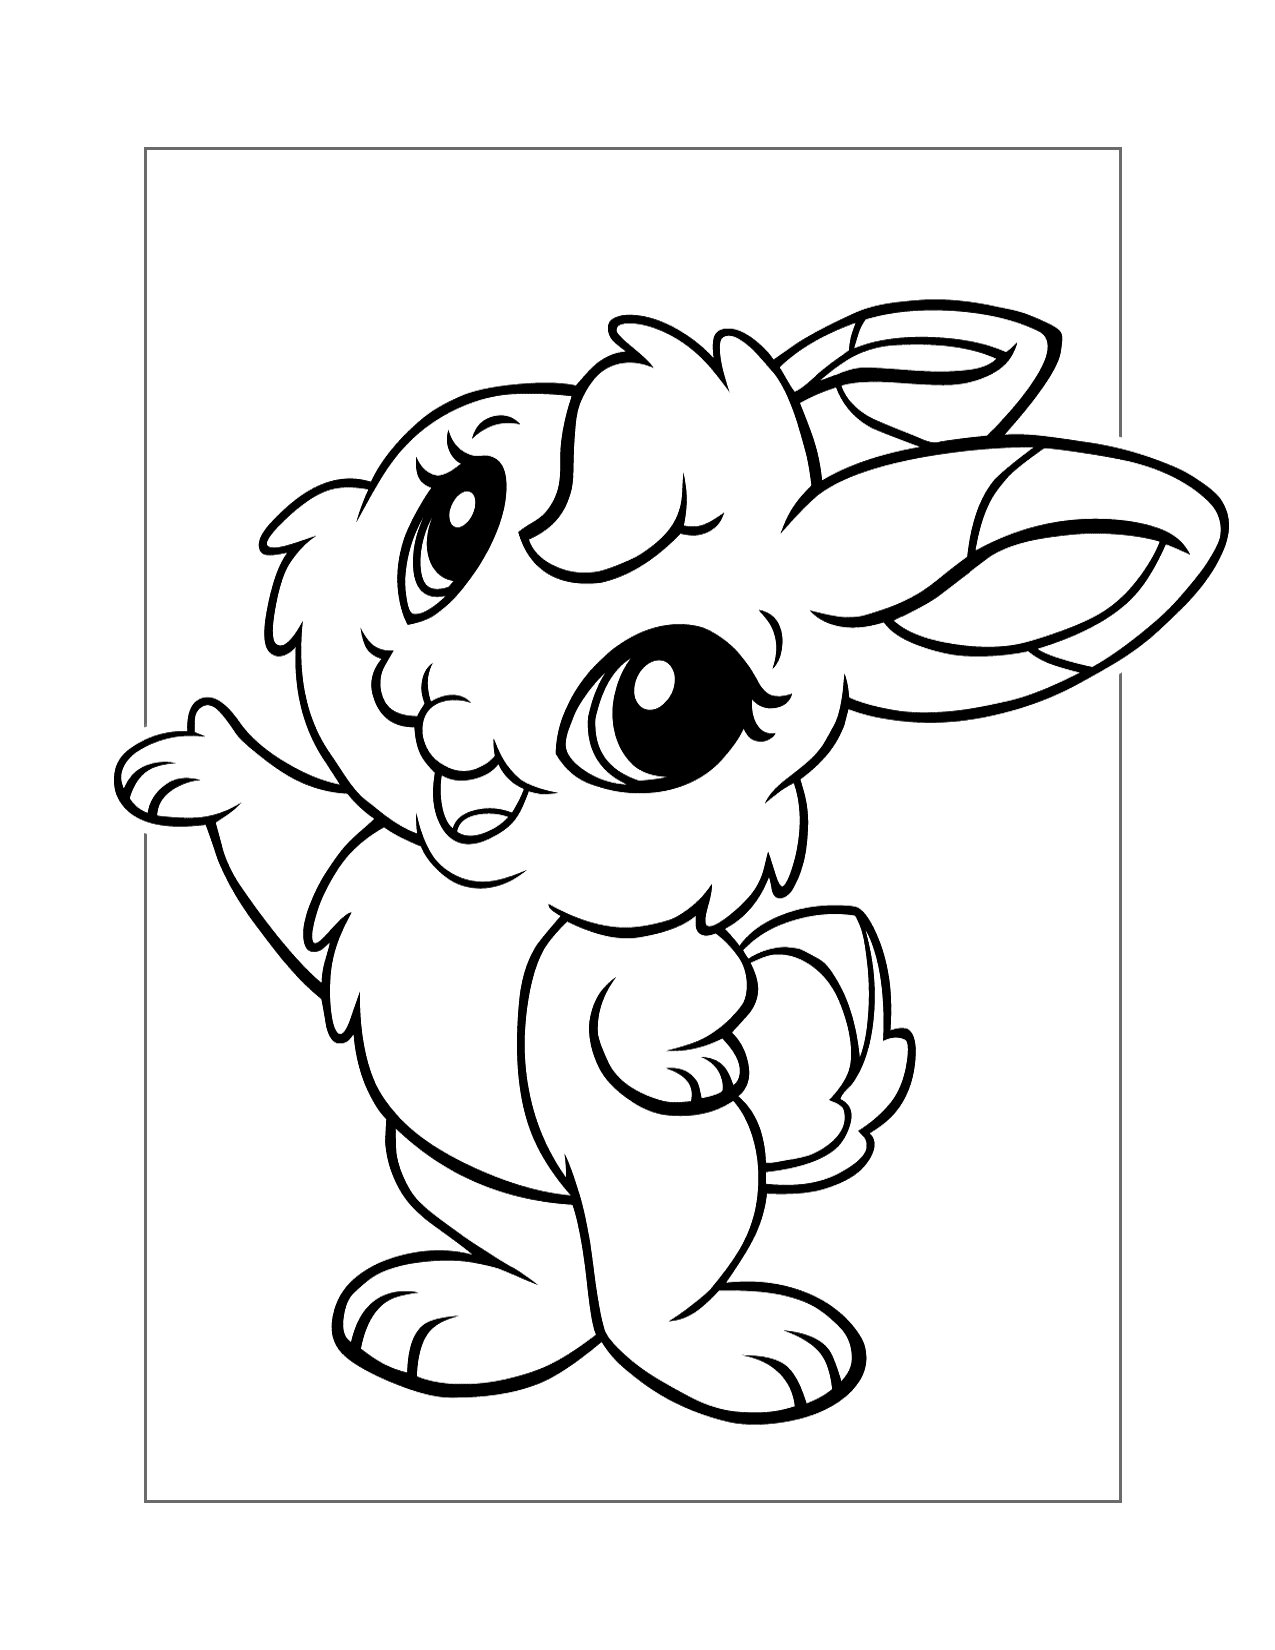 Adorable Rabbit Character Coloring Page